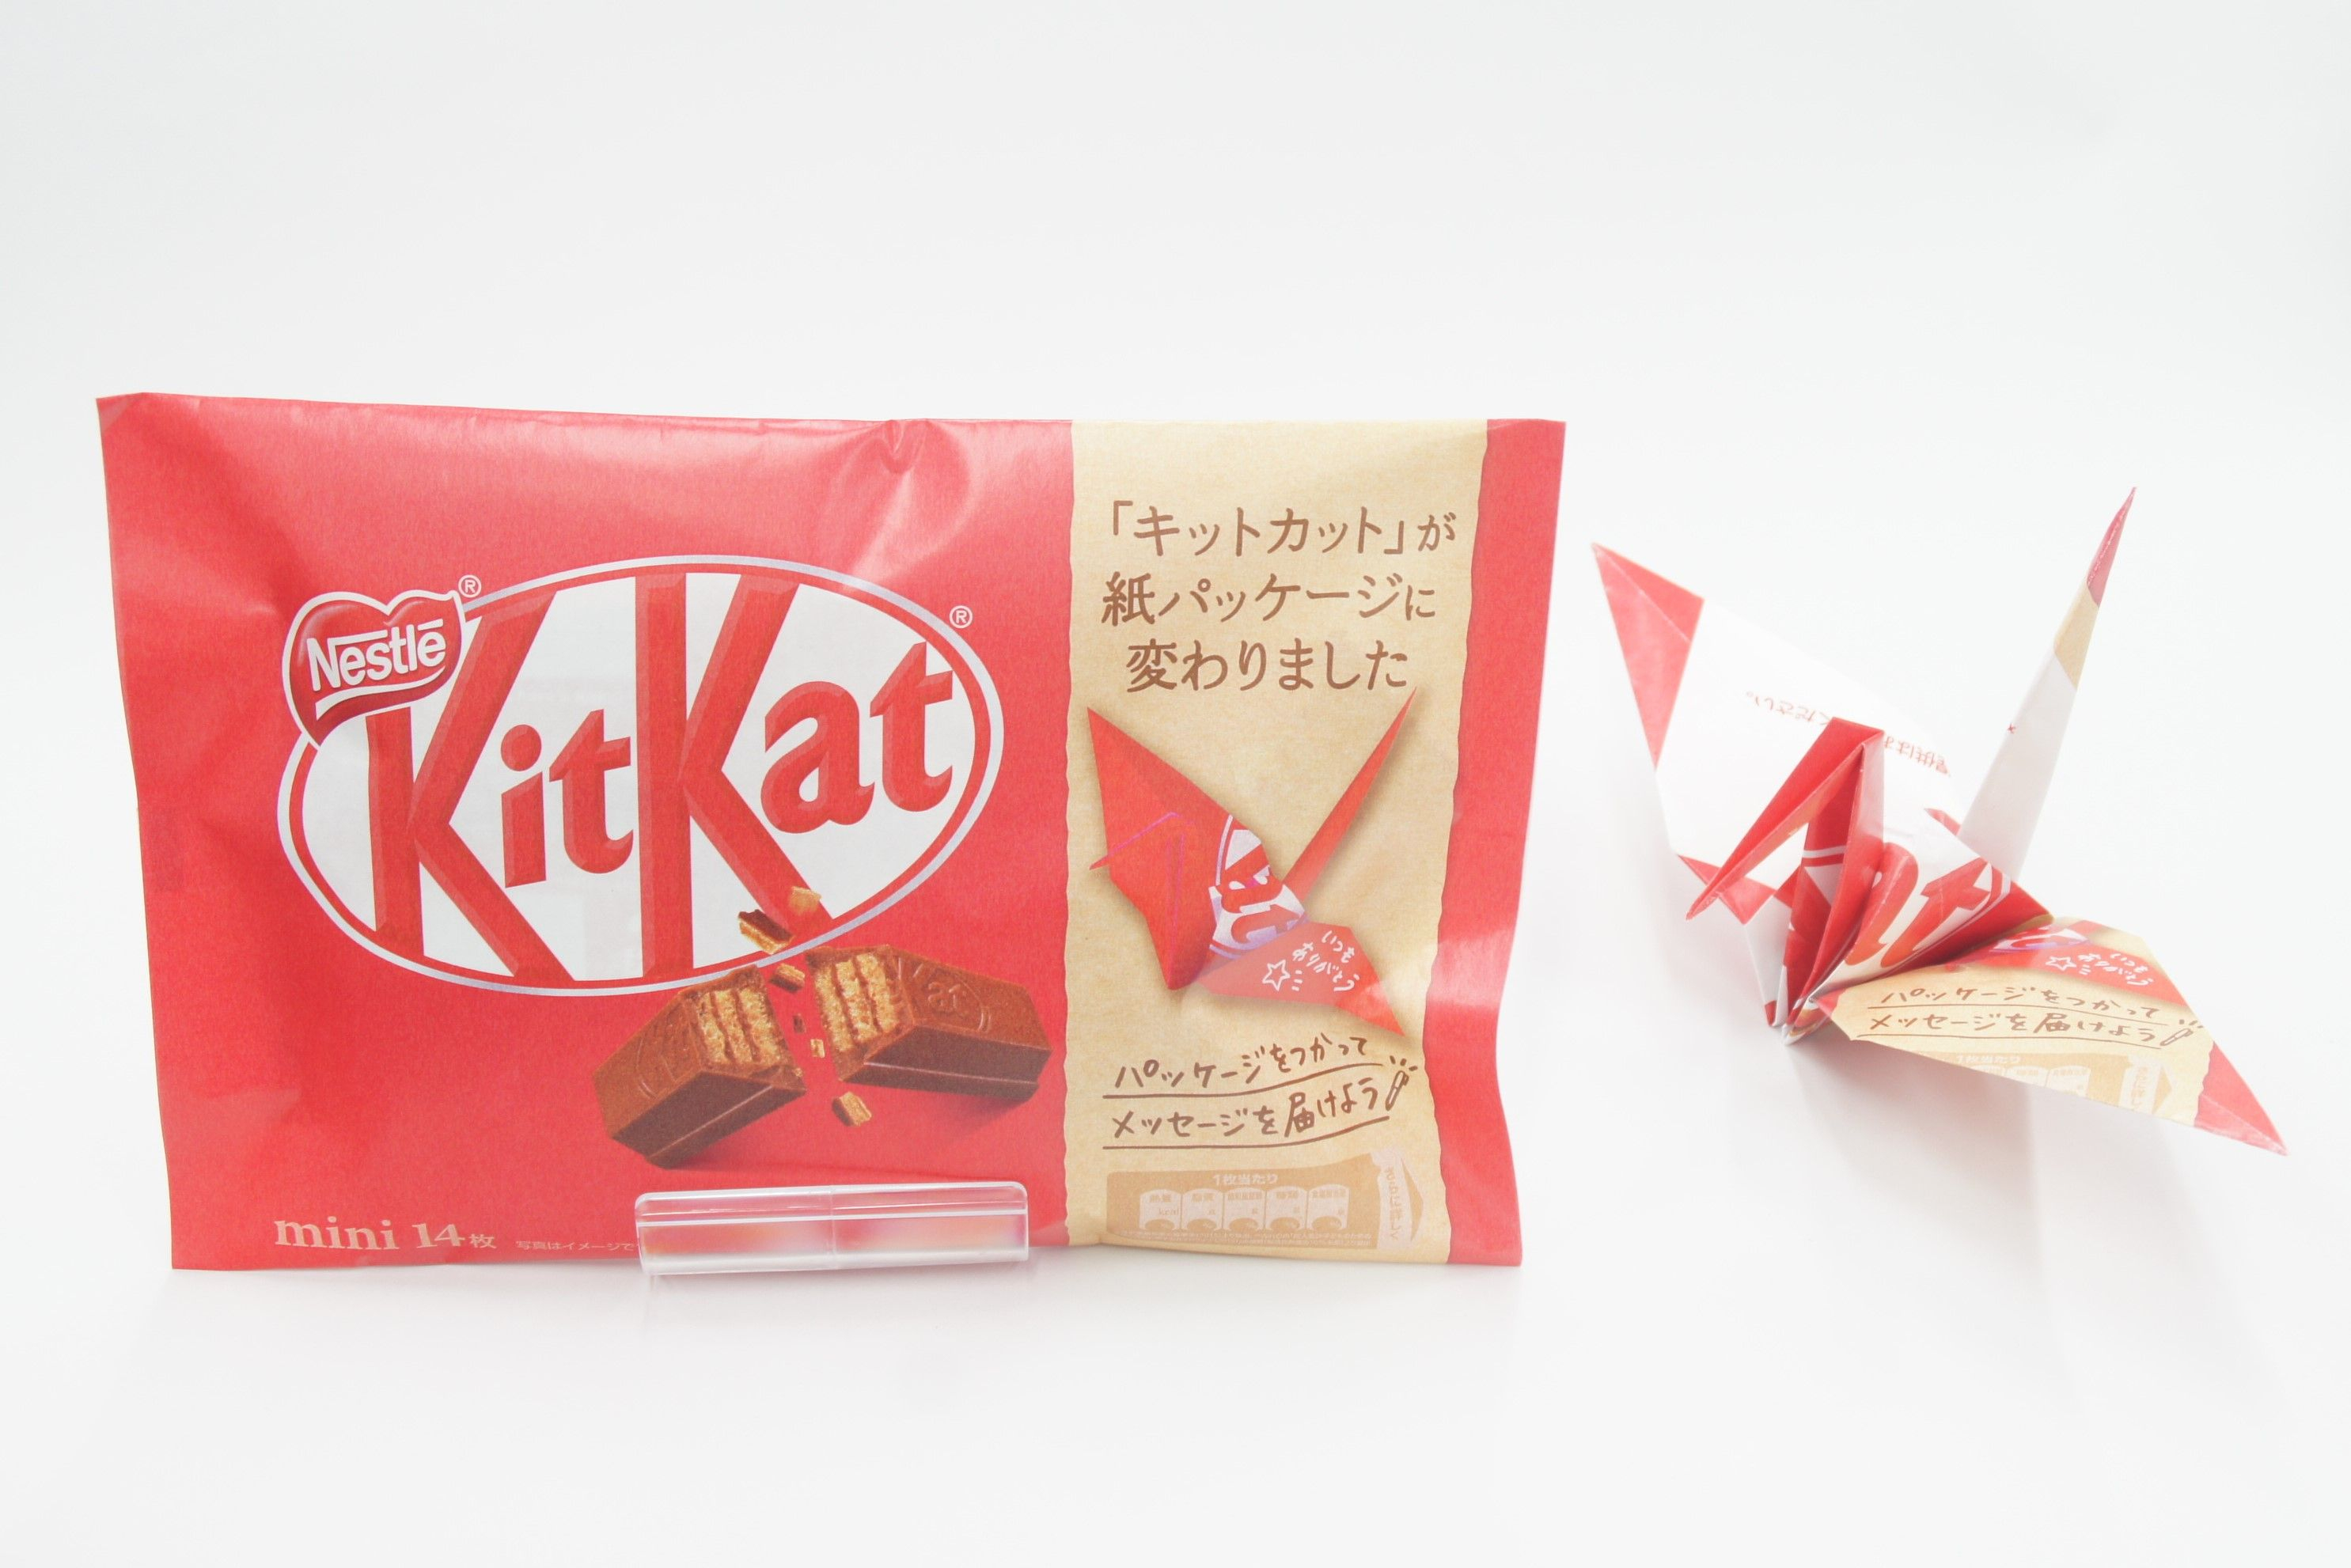 Where To Buy Origami Paper In Stores Nestl Japan Is Selling Kitkats Wrapped In Origami Paper